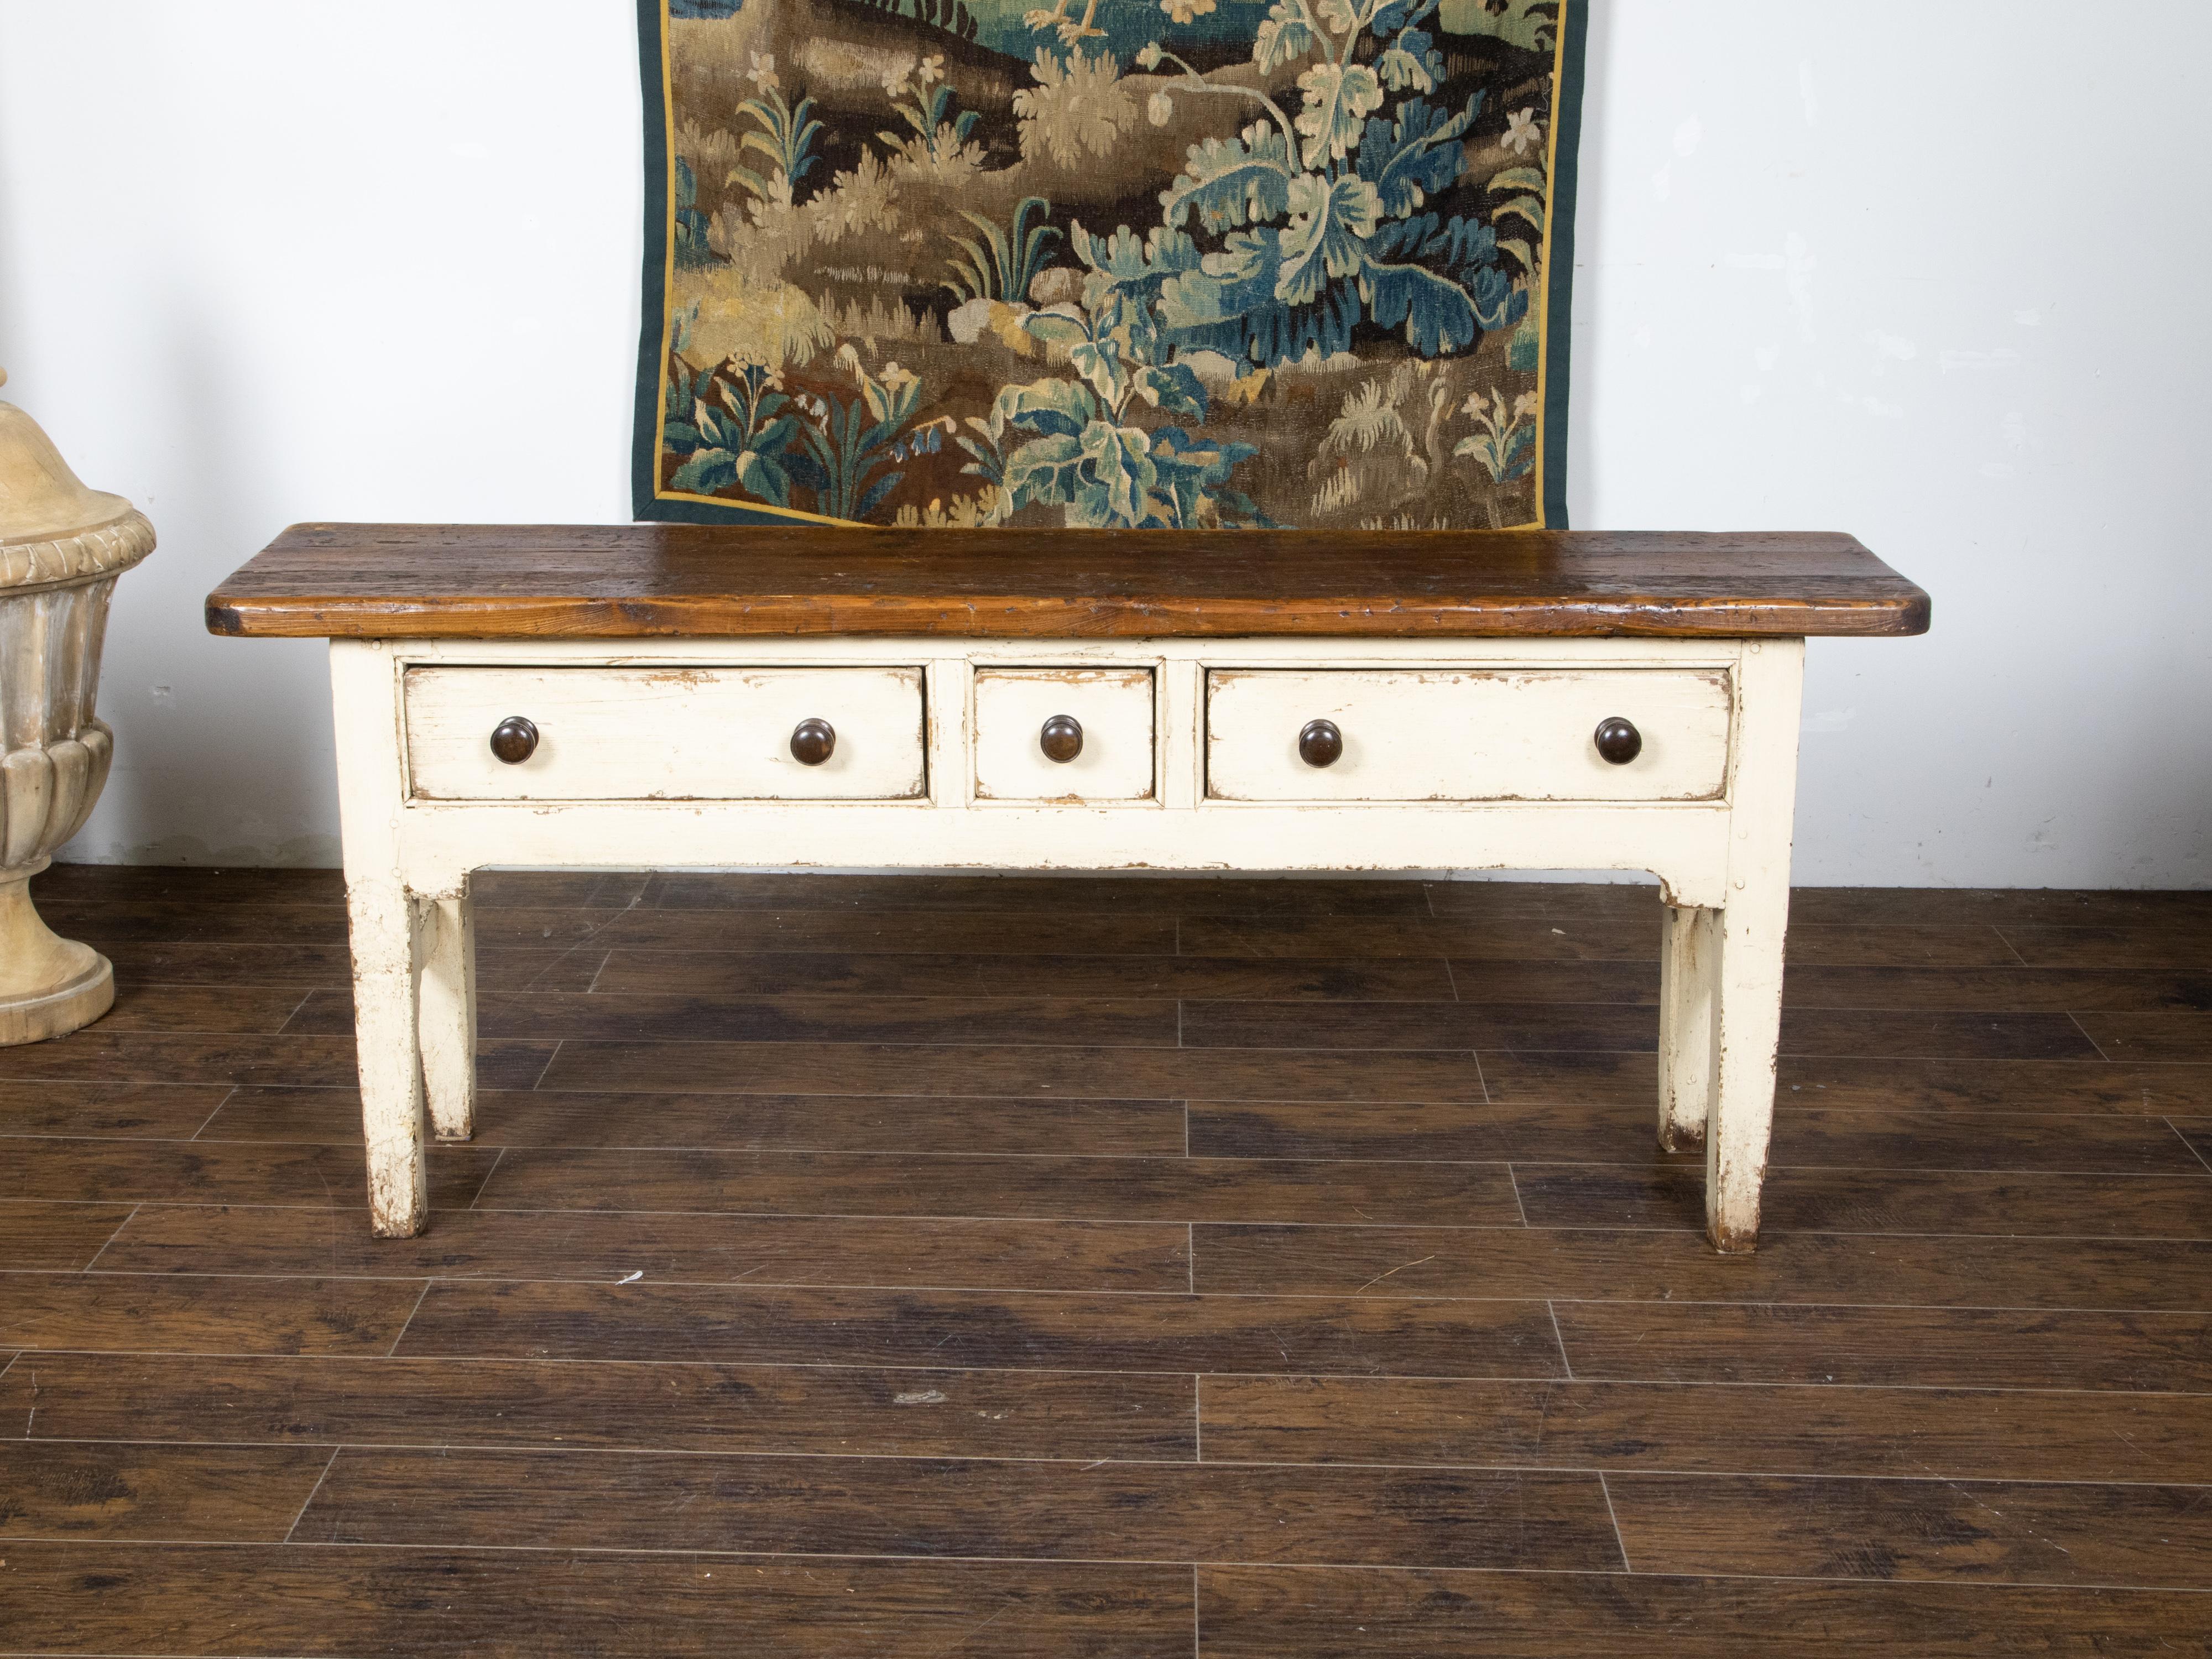 An English console or sofa table from the 20th century, with brown top, cream painted base, three drawers and great rustic character. Created in England during the 20th century, this table features a nicely distressed rectangular brown wood planked